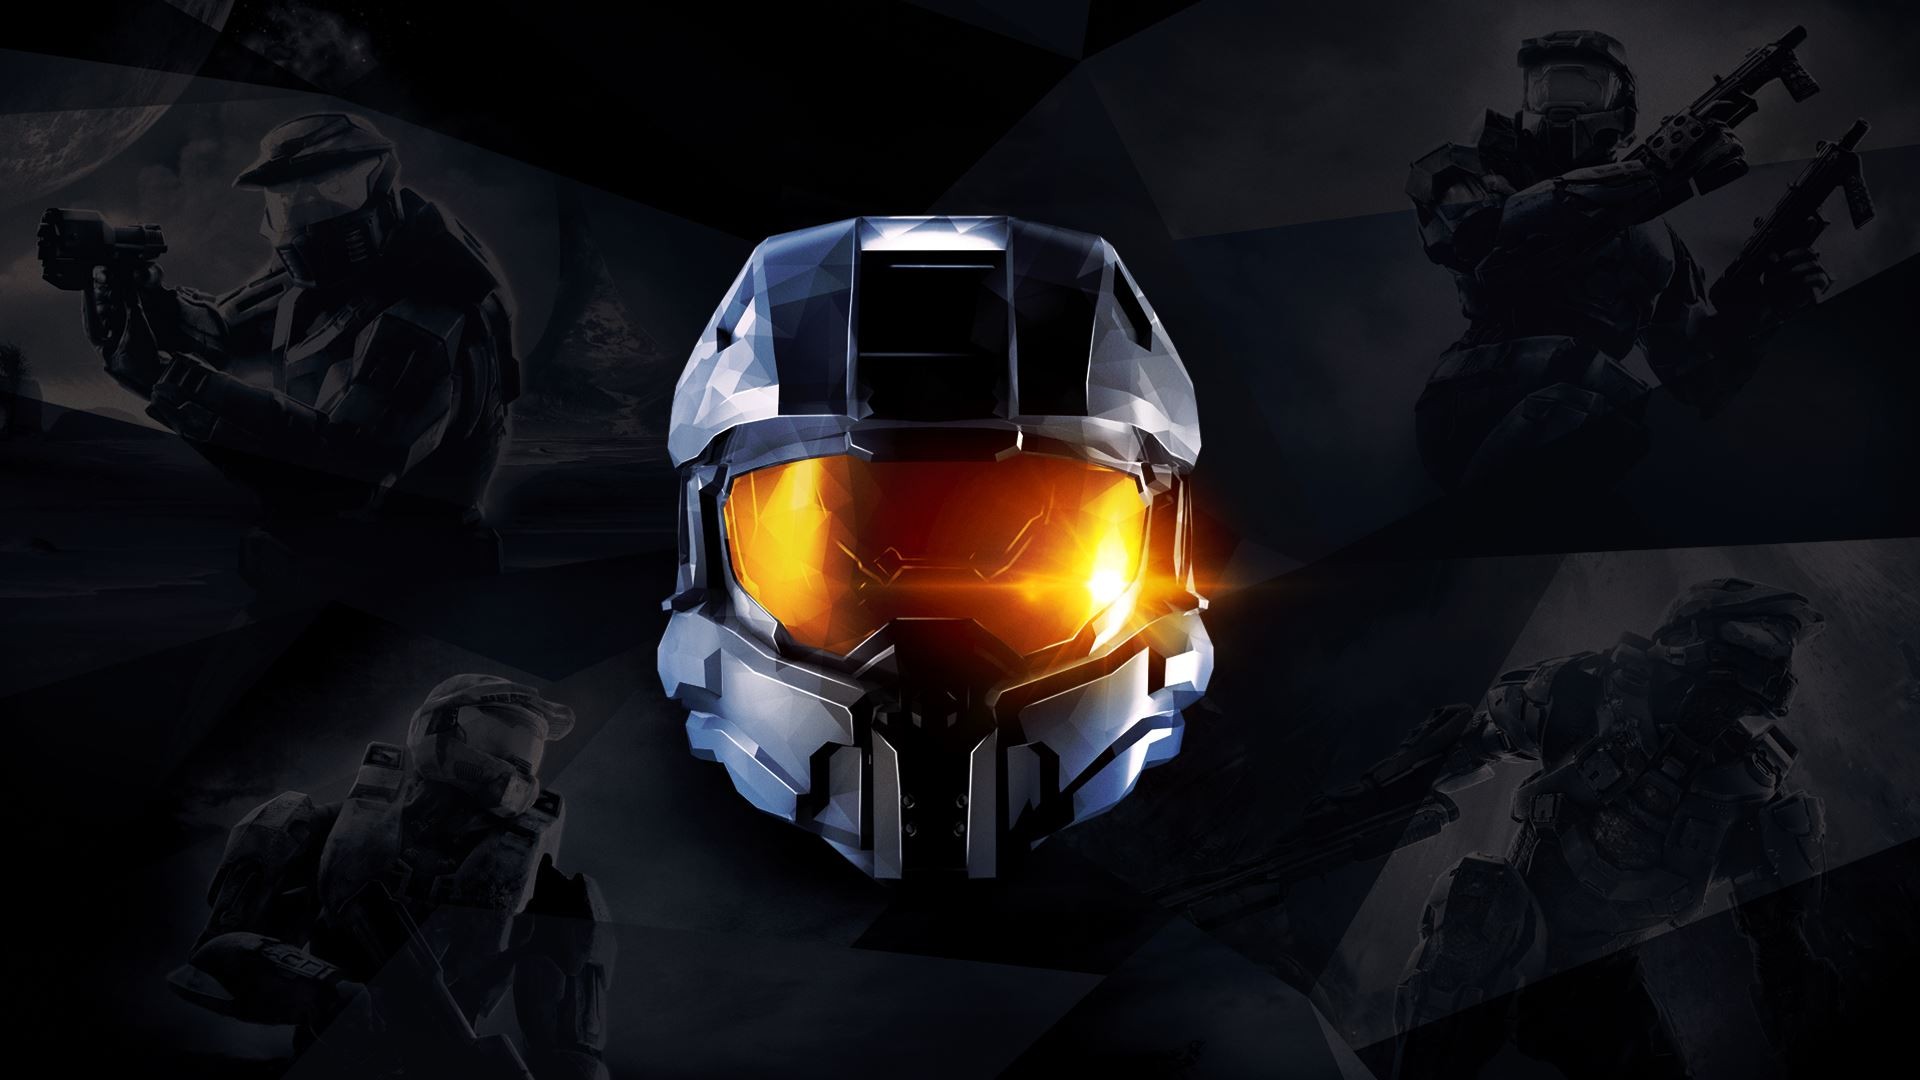 Master Chief, Blue Team, Halo, Halo 5, Halo: The Master Chief Collection Wallpaper